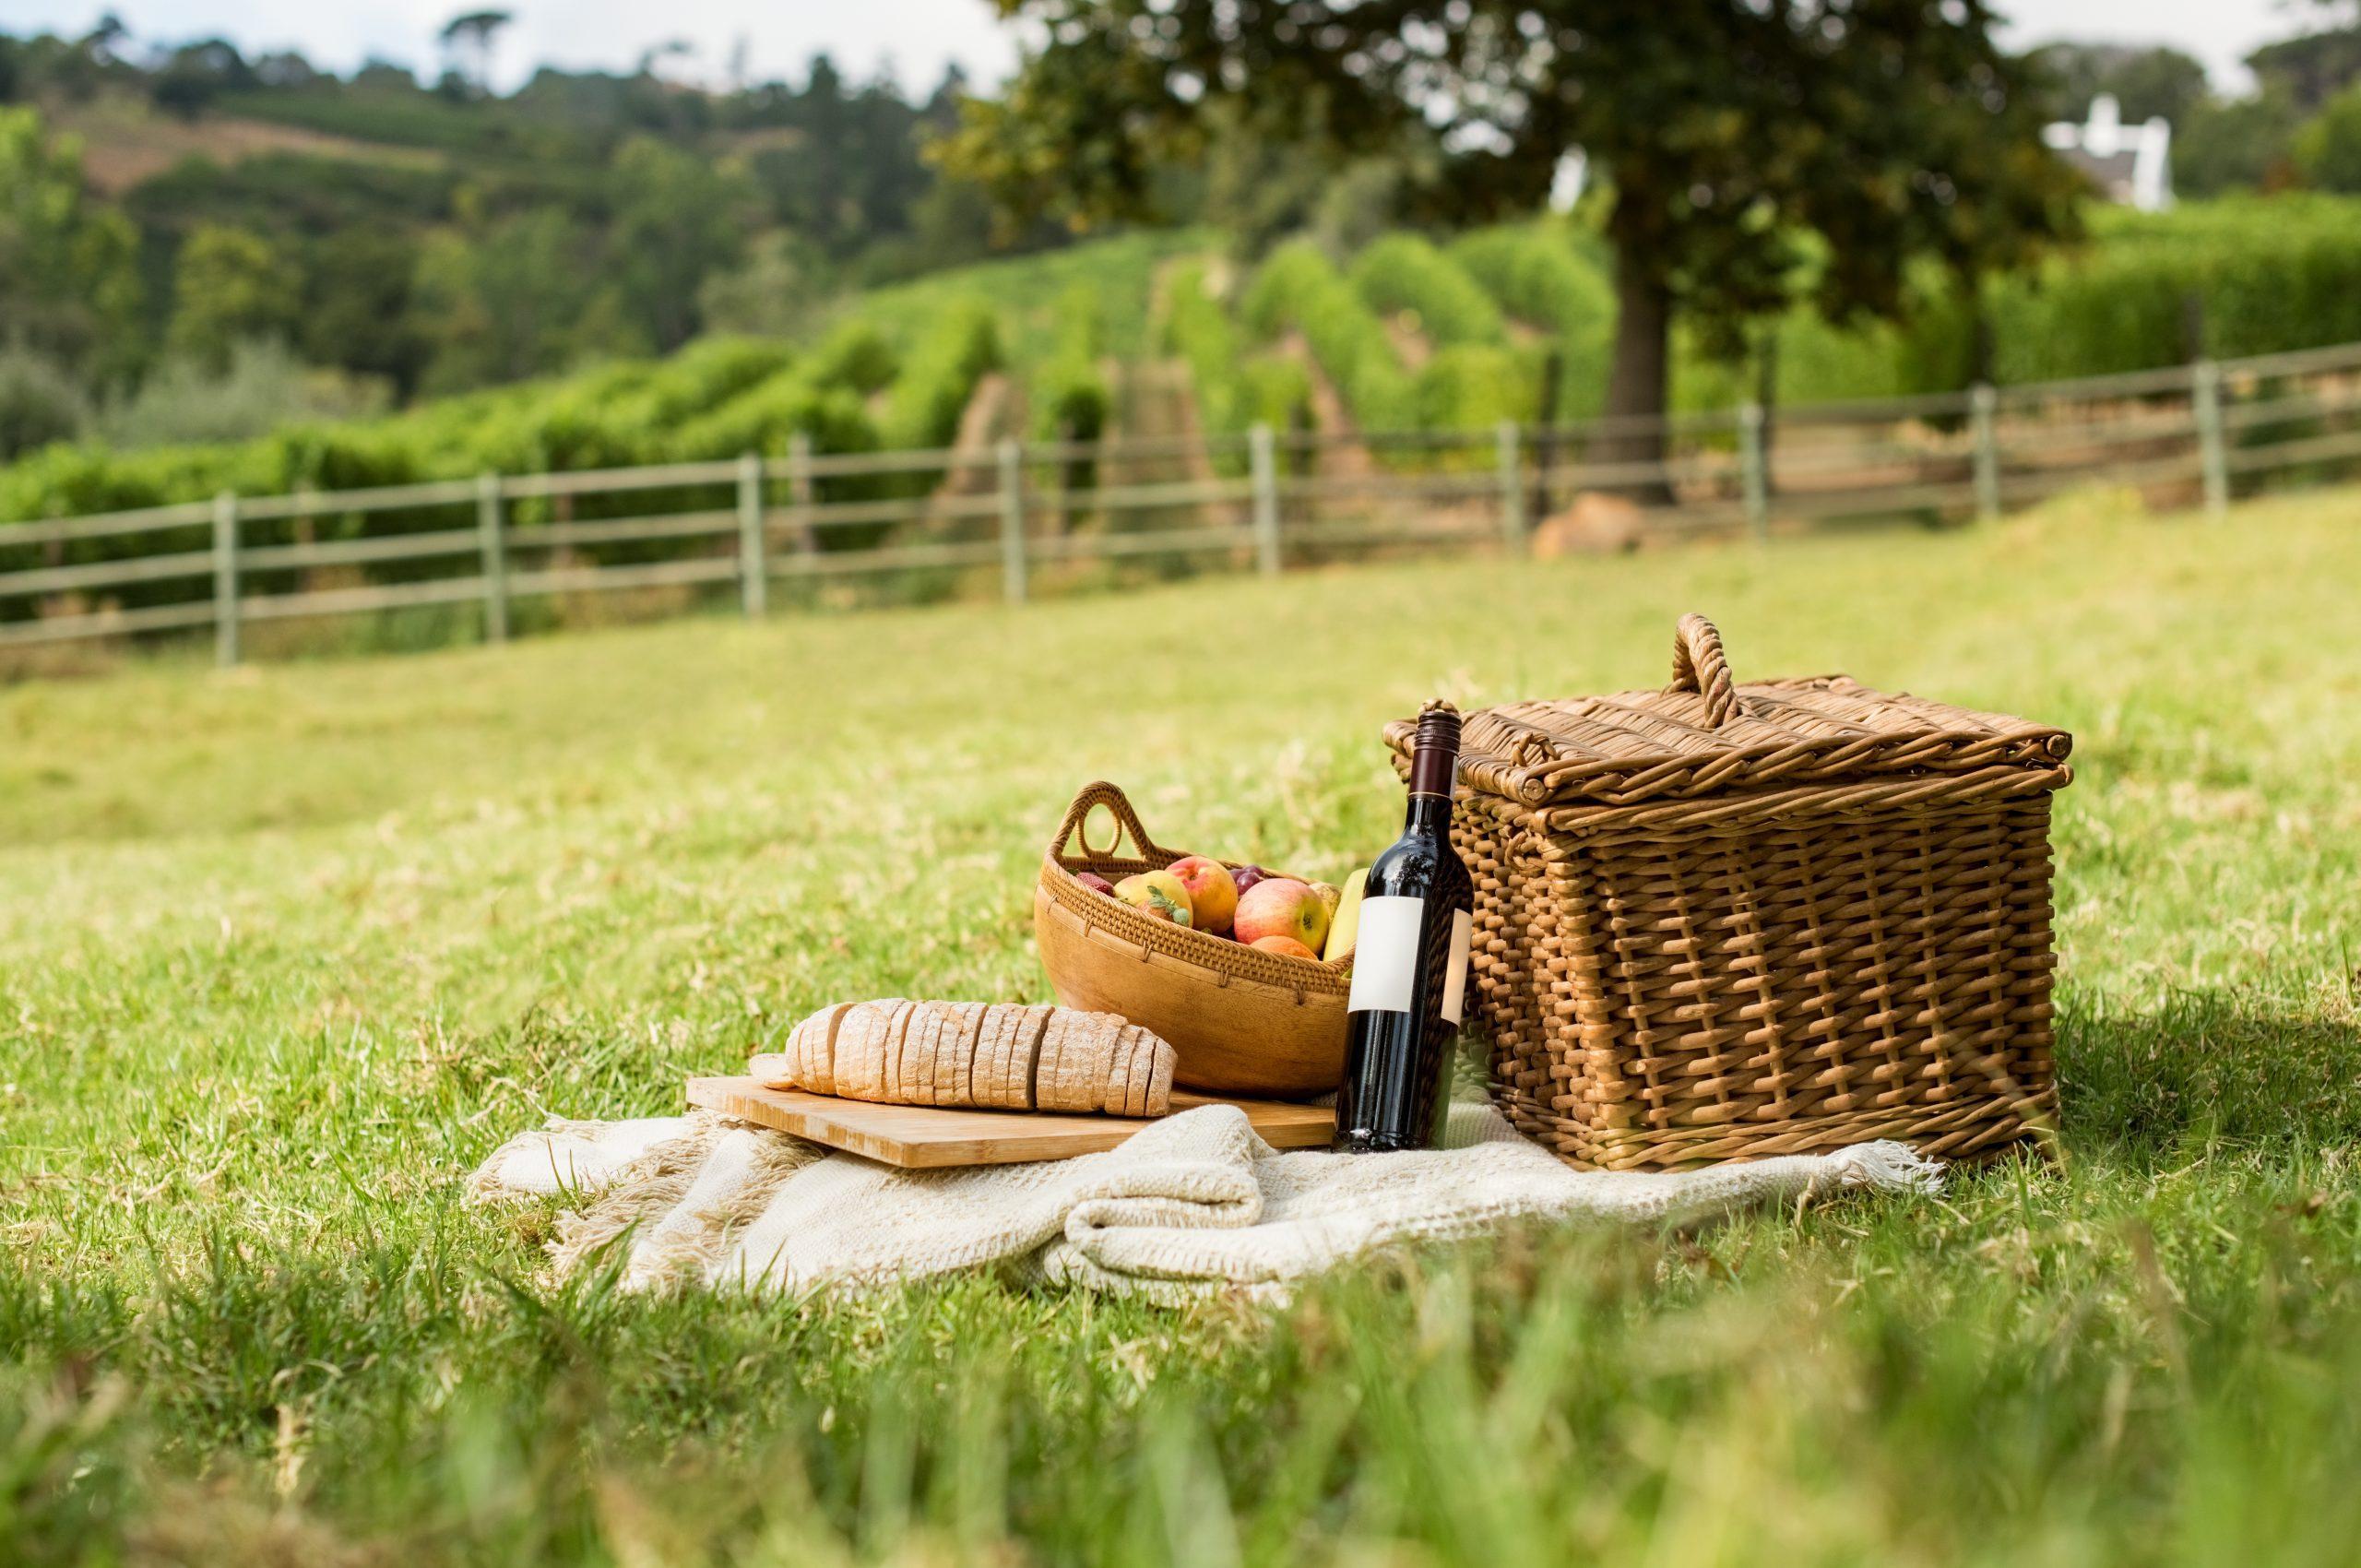 Picnic basket on grass with food and drink on blanket. Picnic lunch outdoor in a nice field on sunny day with bread, fruit and bottle of red wine. Pic nic on green grass with landscape in the background.